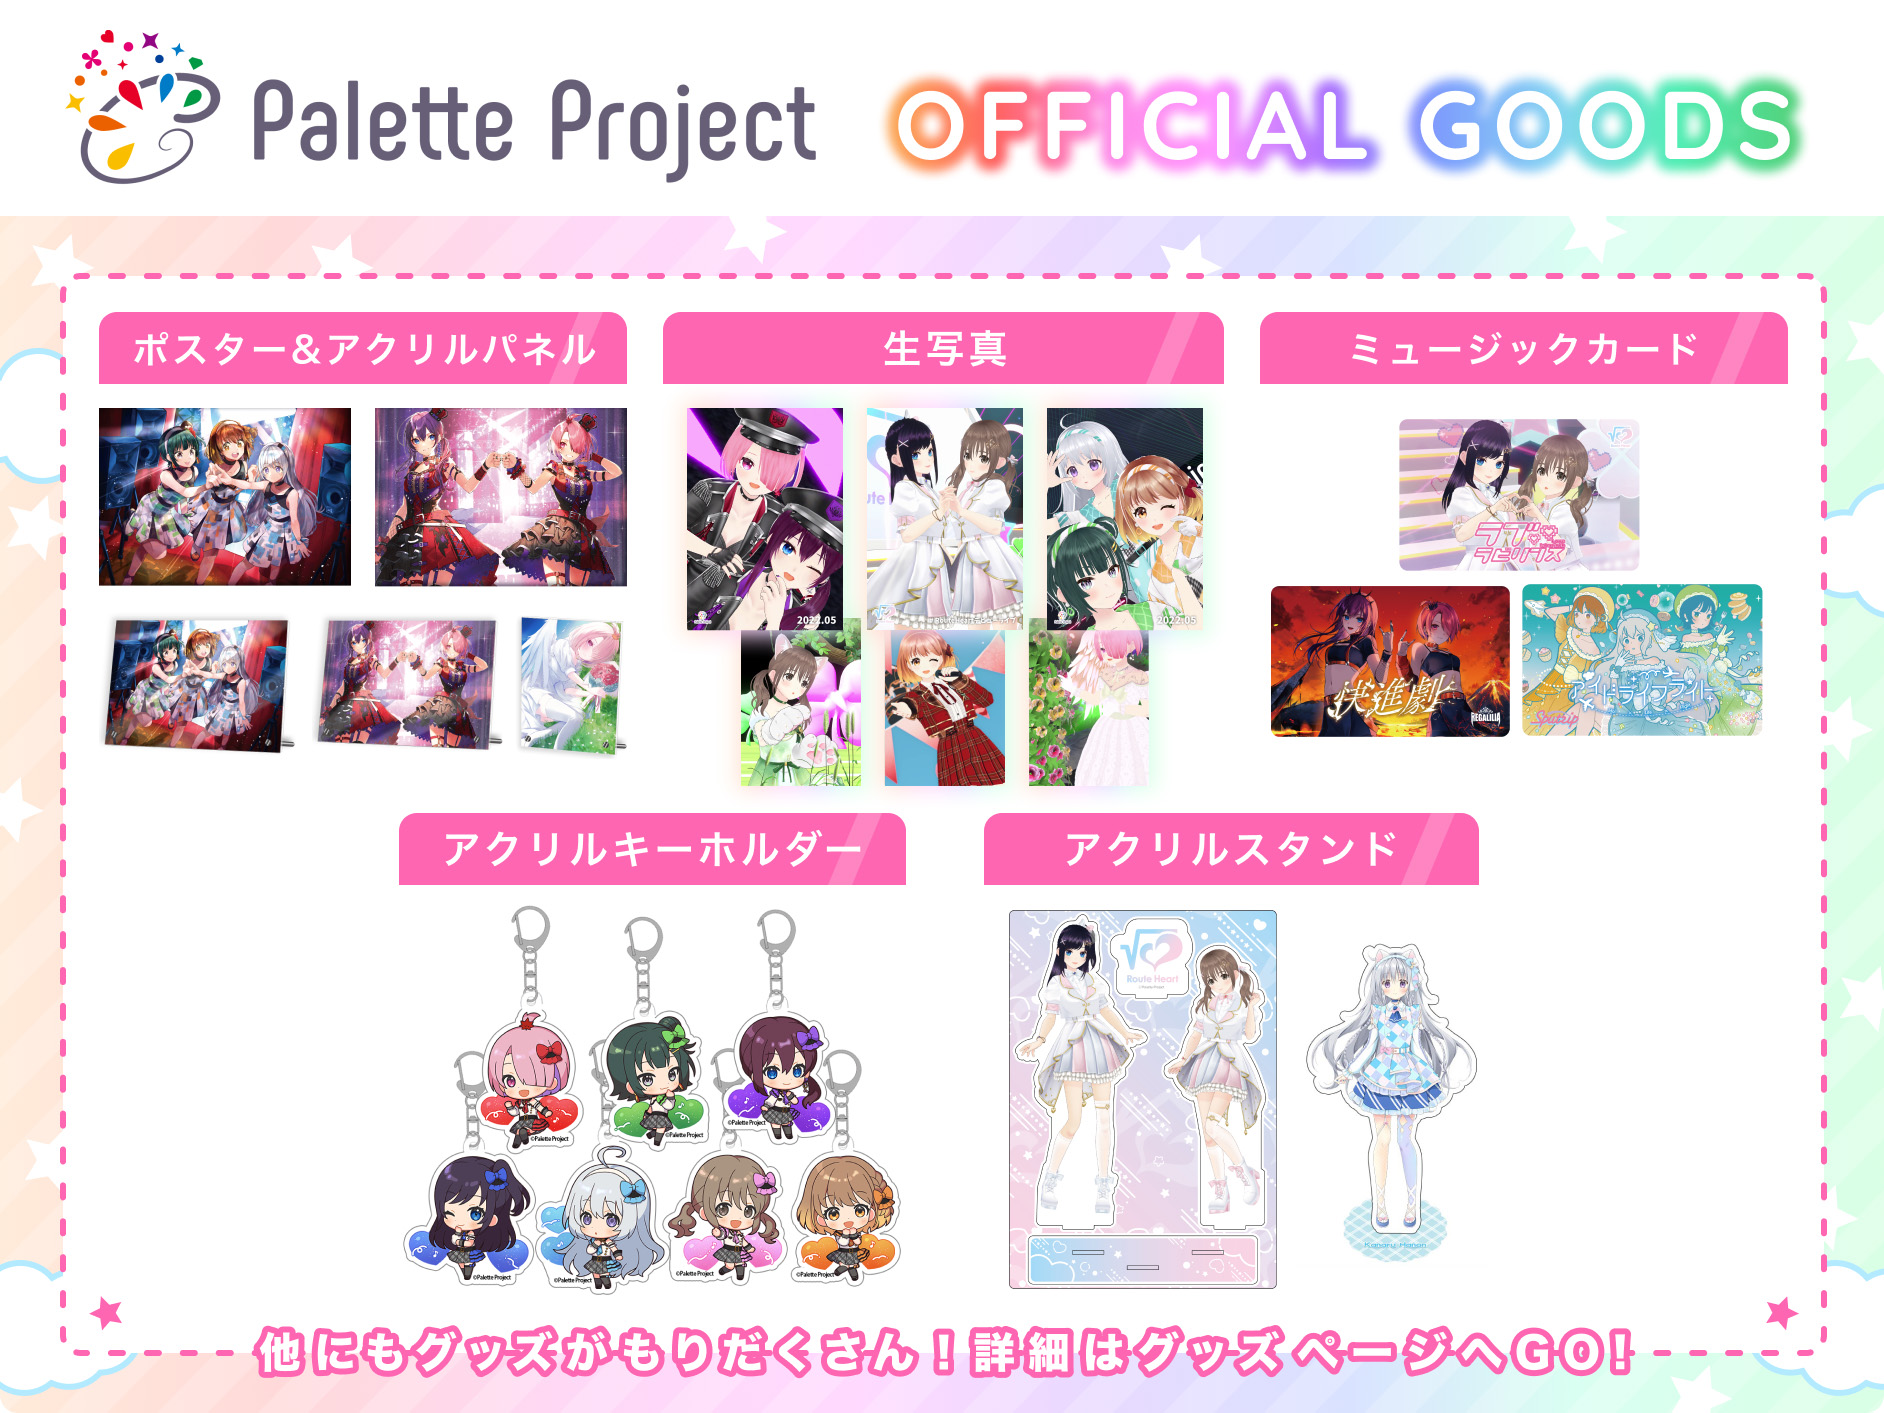 Palette Project 货物